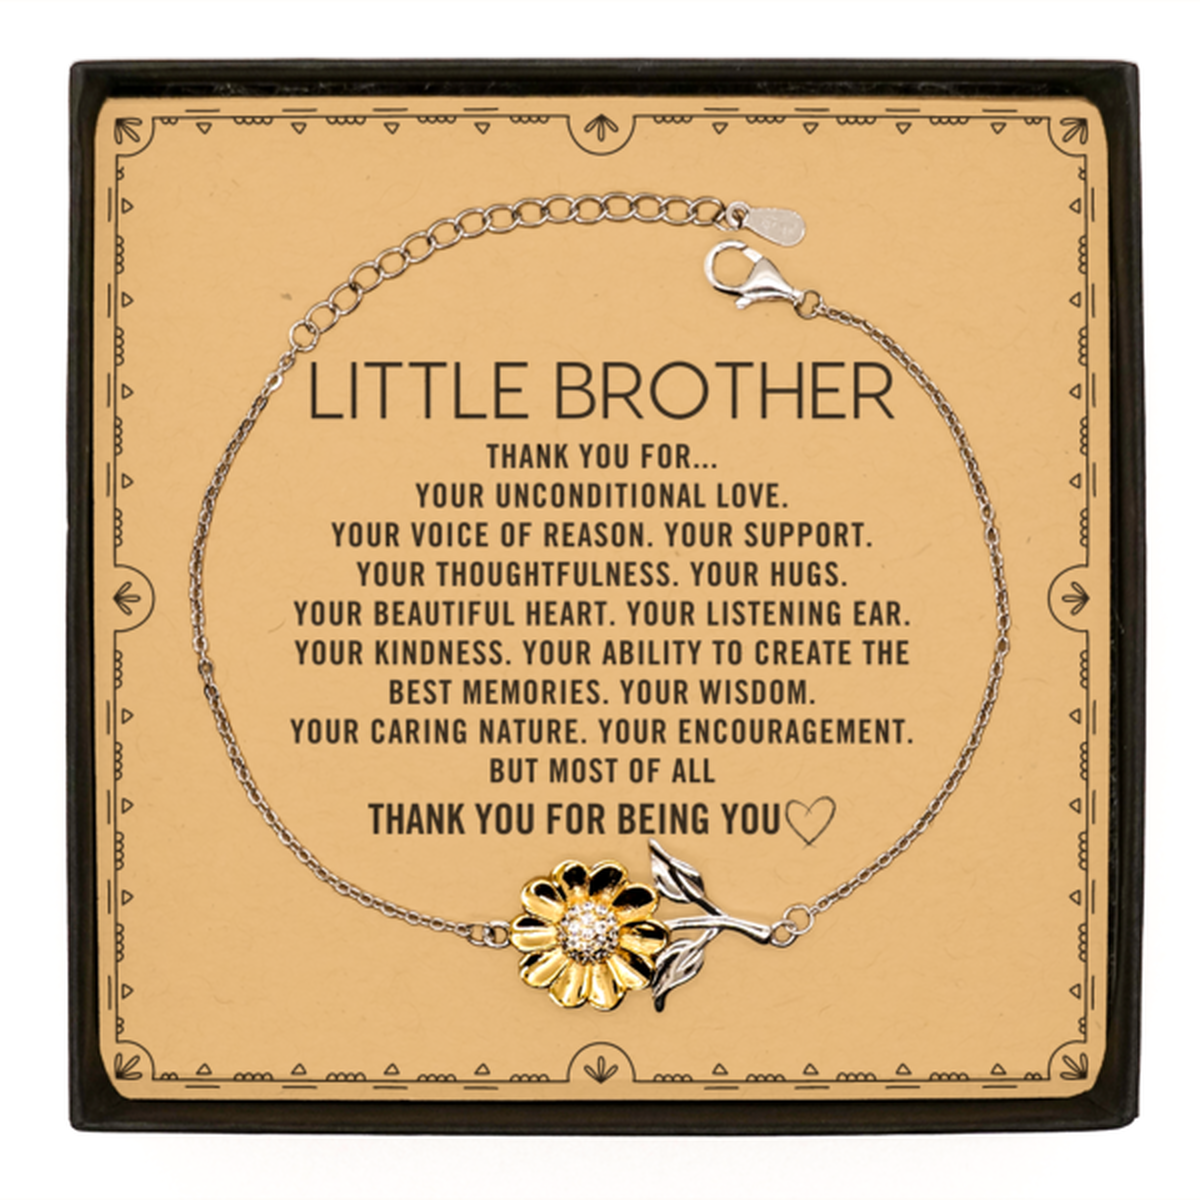 Little Brother Sunflower Bracelet Custom, Message Card Gifts For Little Brother Christmas Graduation Birthday Gifts for Men Women Little Brother Thank you for Your unconditional love